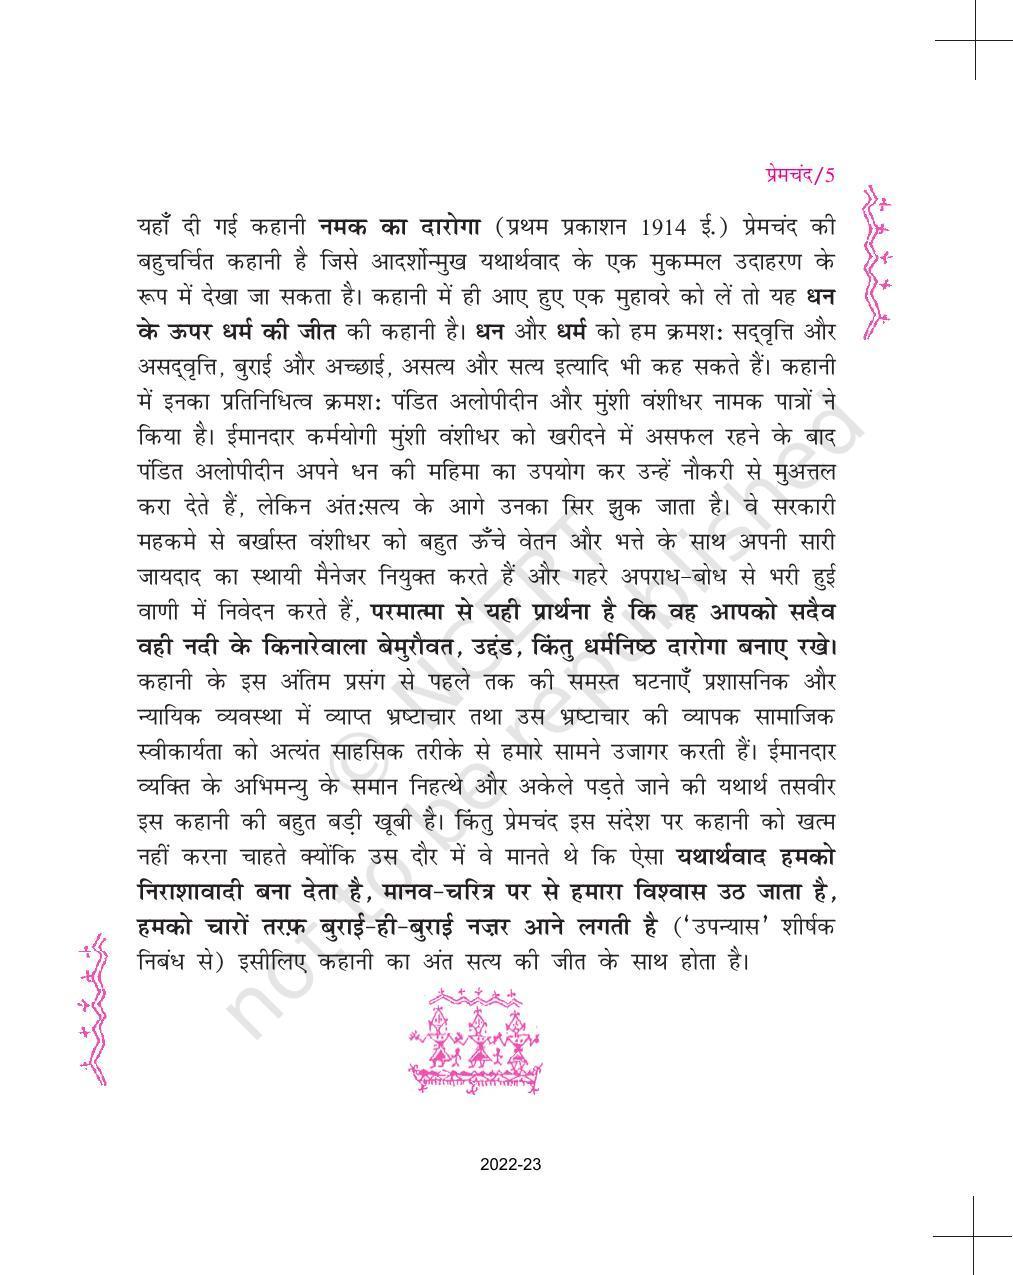 NCERT Book for Class 11 Hindi Aroh Chapter 1 नमक का दारोगा - Page 5